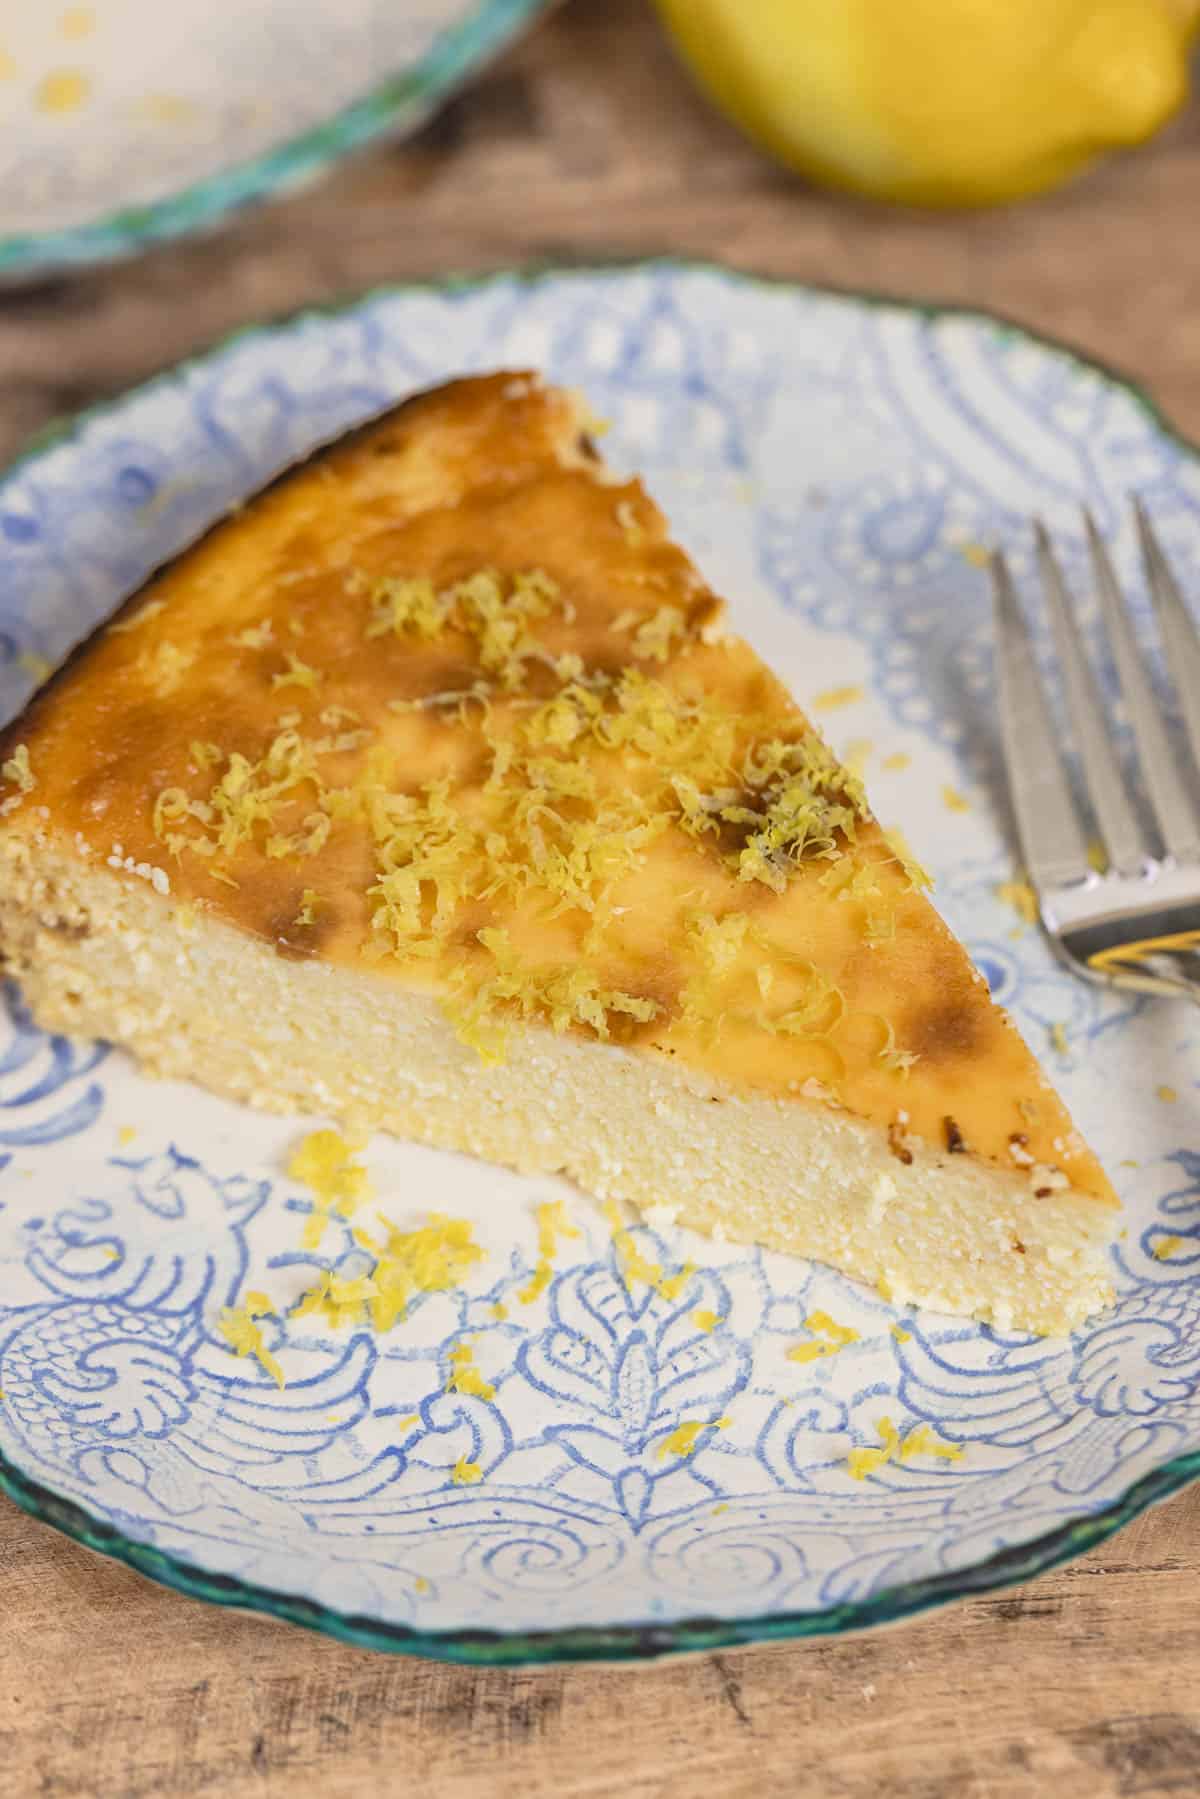 slice of Italian cheesecake on a small plate with a sprinkle of lemon zest. Fork on the side